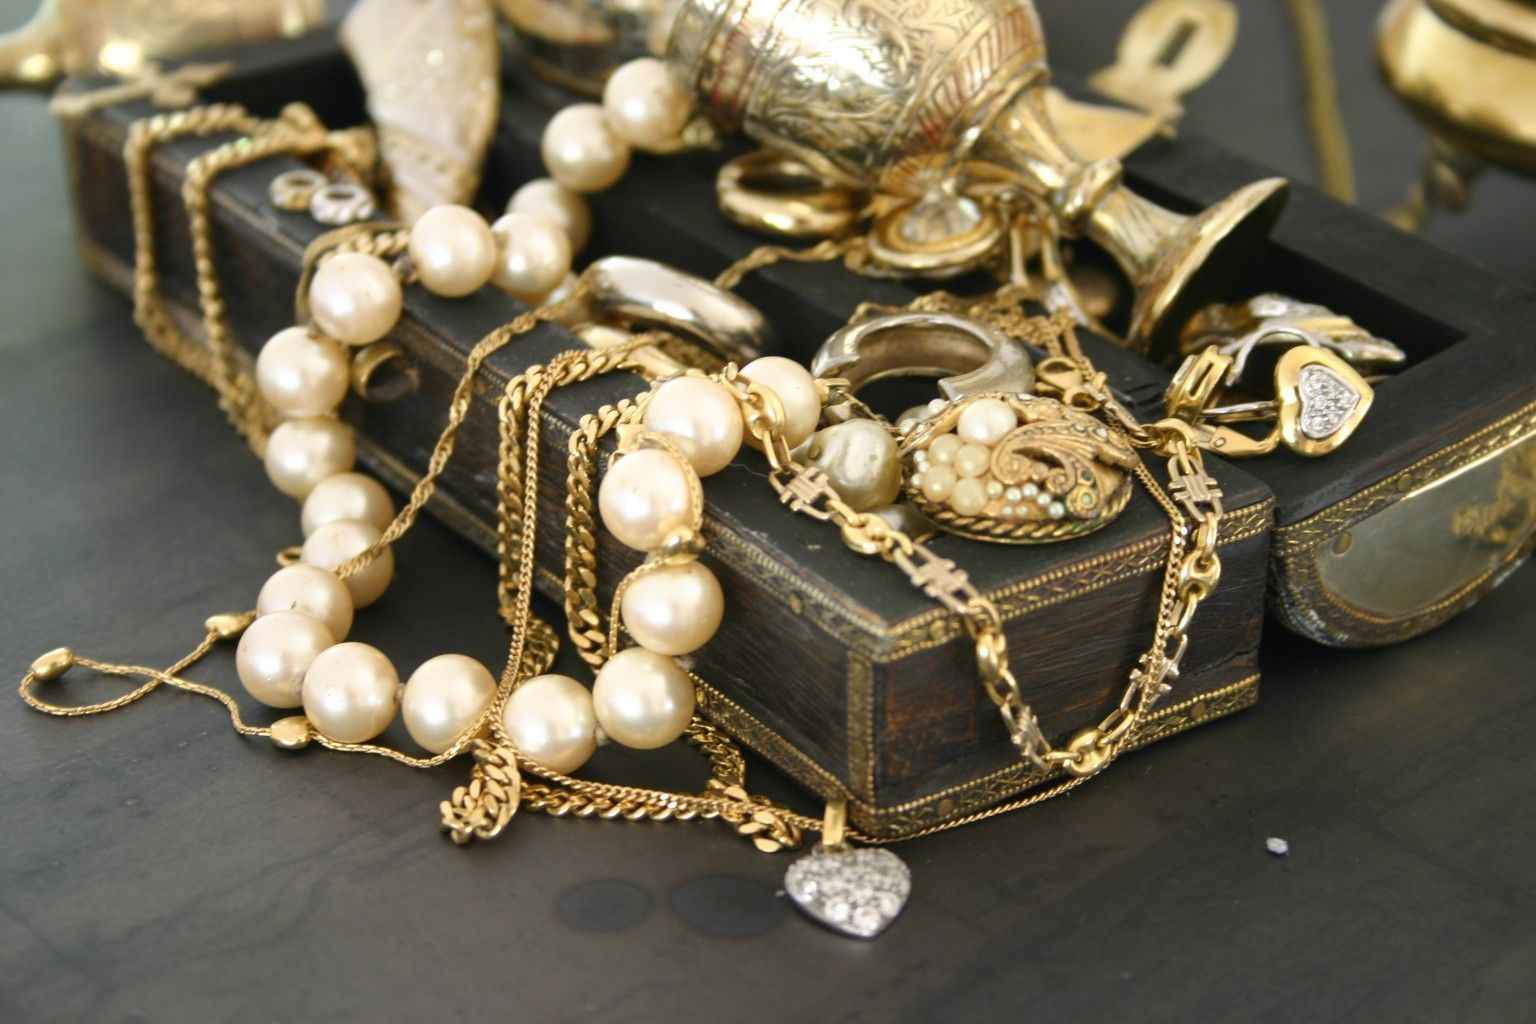 Gold Ornament & Jewelry Buyer in Houston, TX